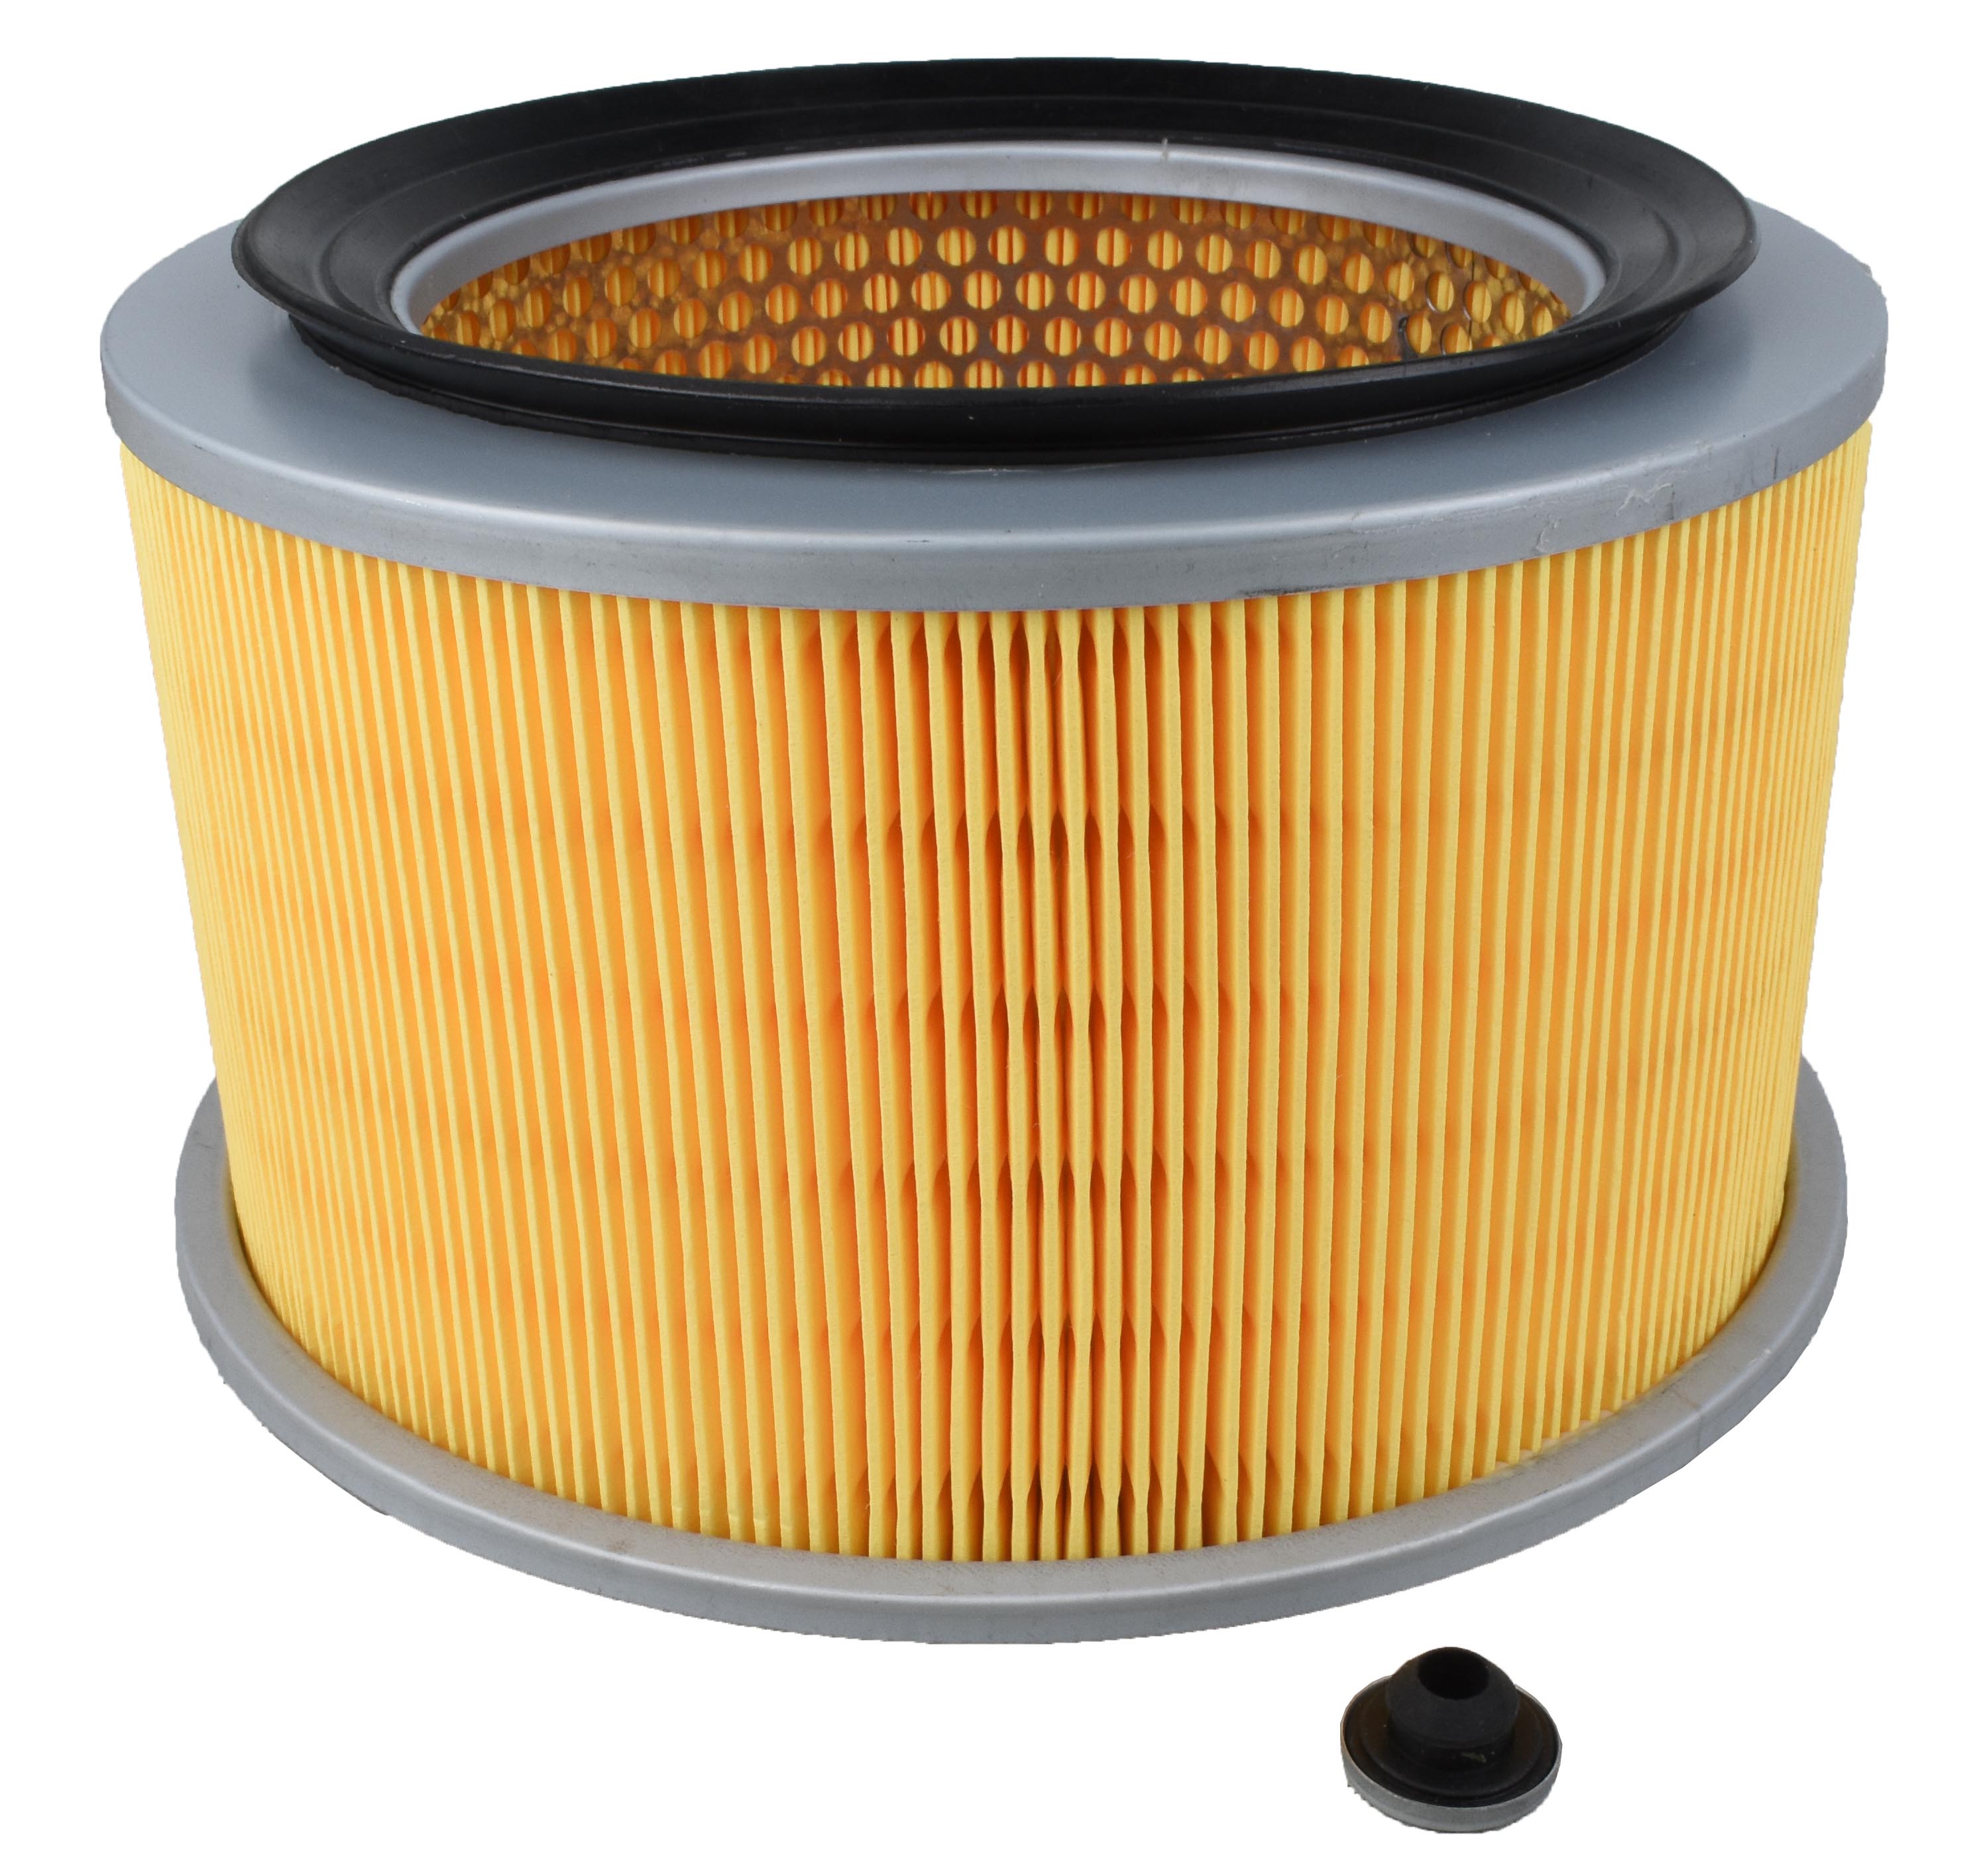 4-1//2/" INLET//OUTLET Details about  / TAN METAL AIR FILTER HOUSING WITH FILTERS 23/"L 10-1//2/" DIA